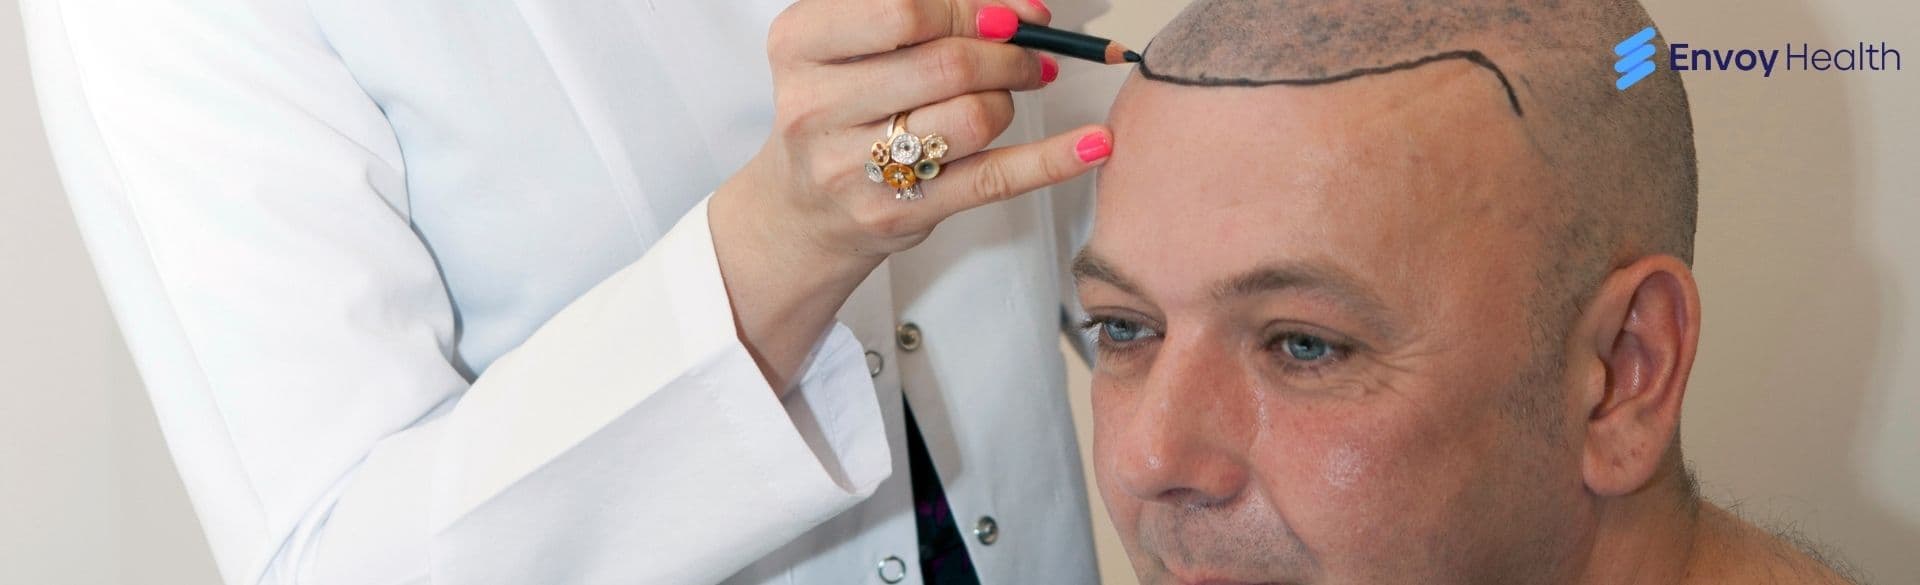 How Much Do Hair Implants Cost in Turkey?